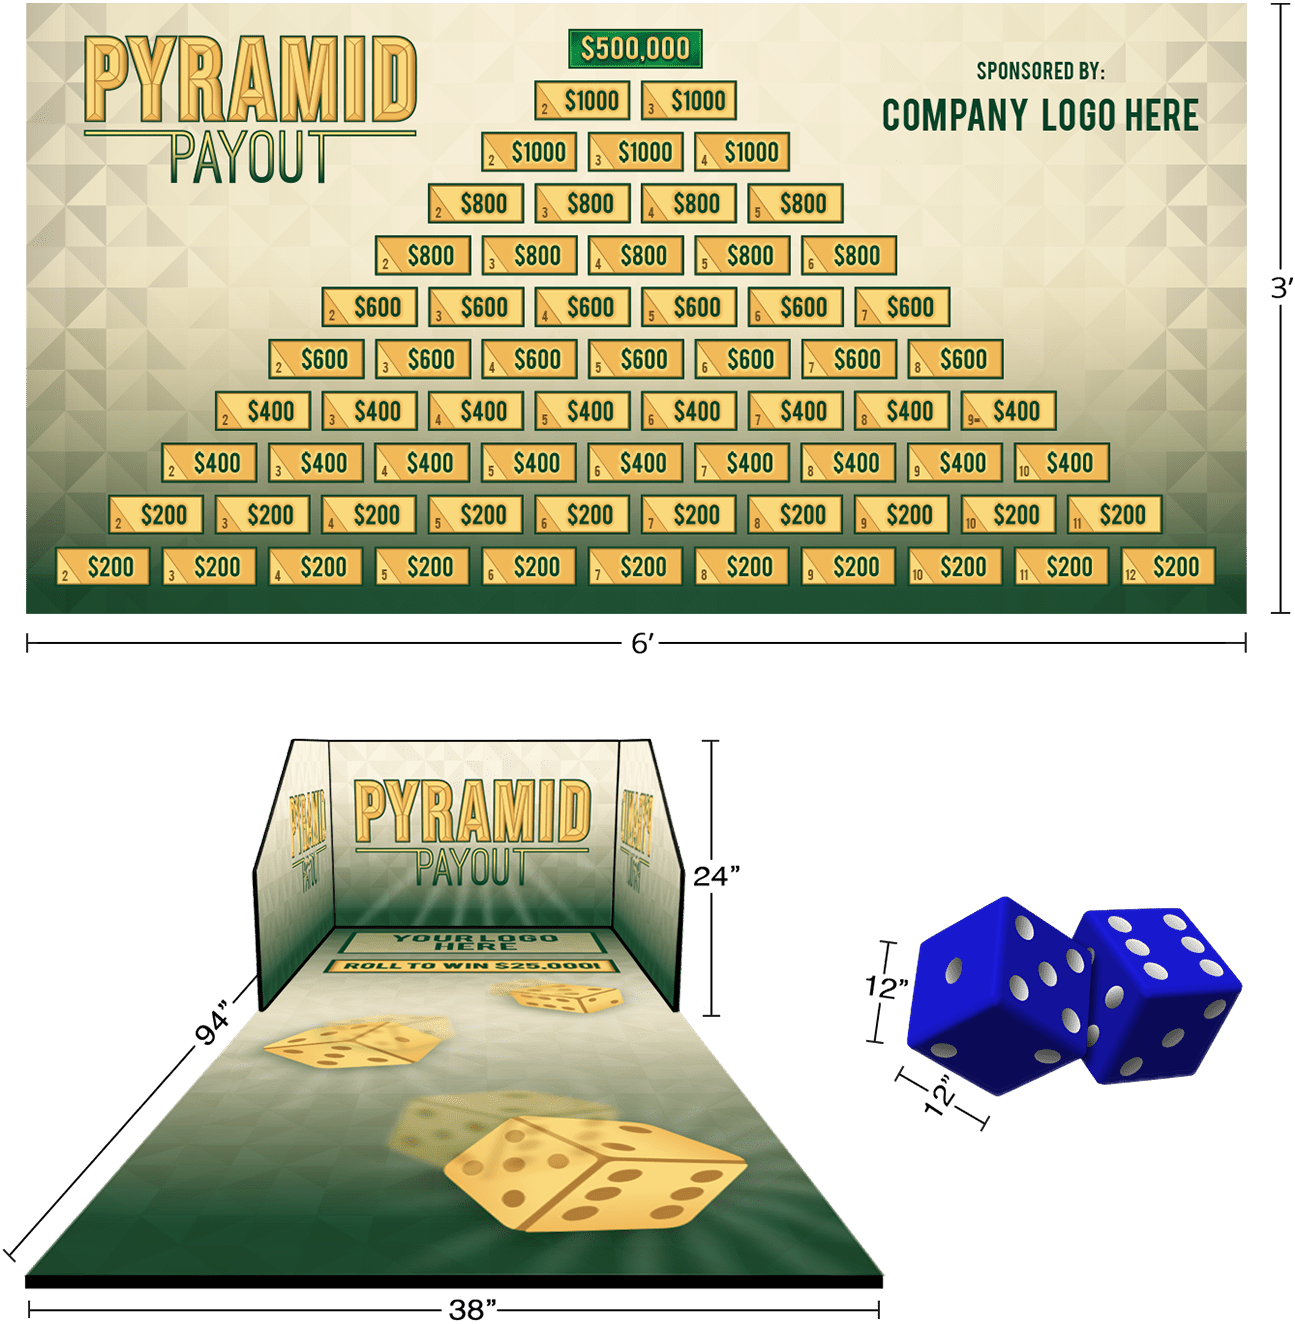 Pyramid Payout Contest Supplies